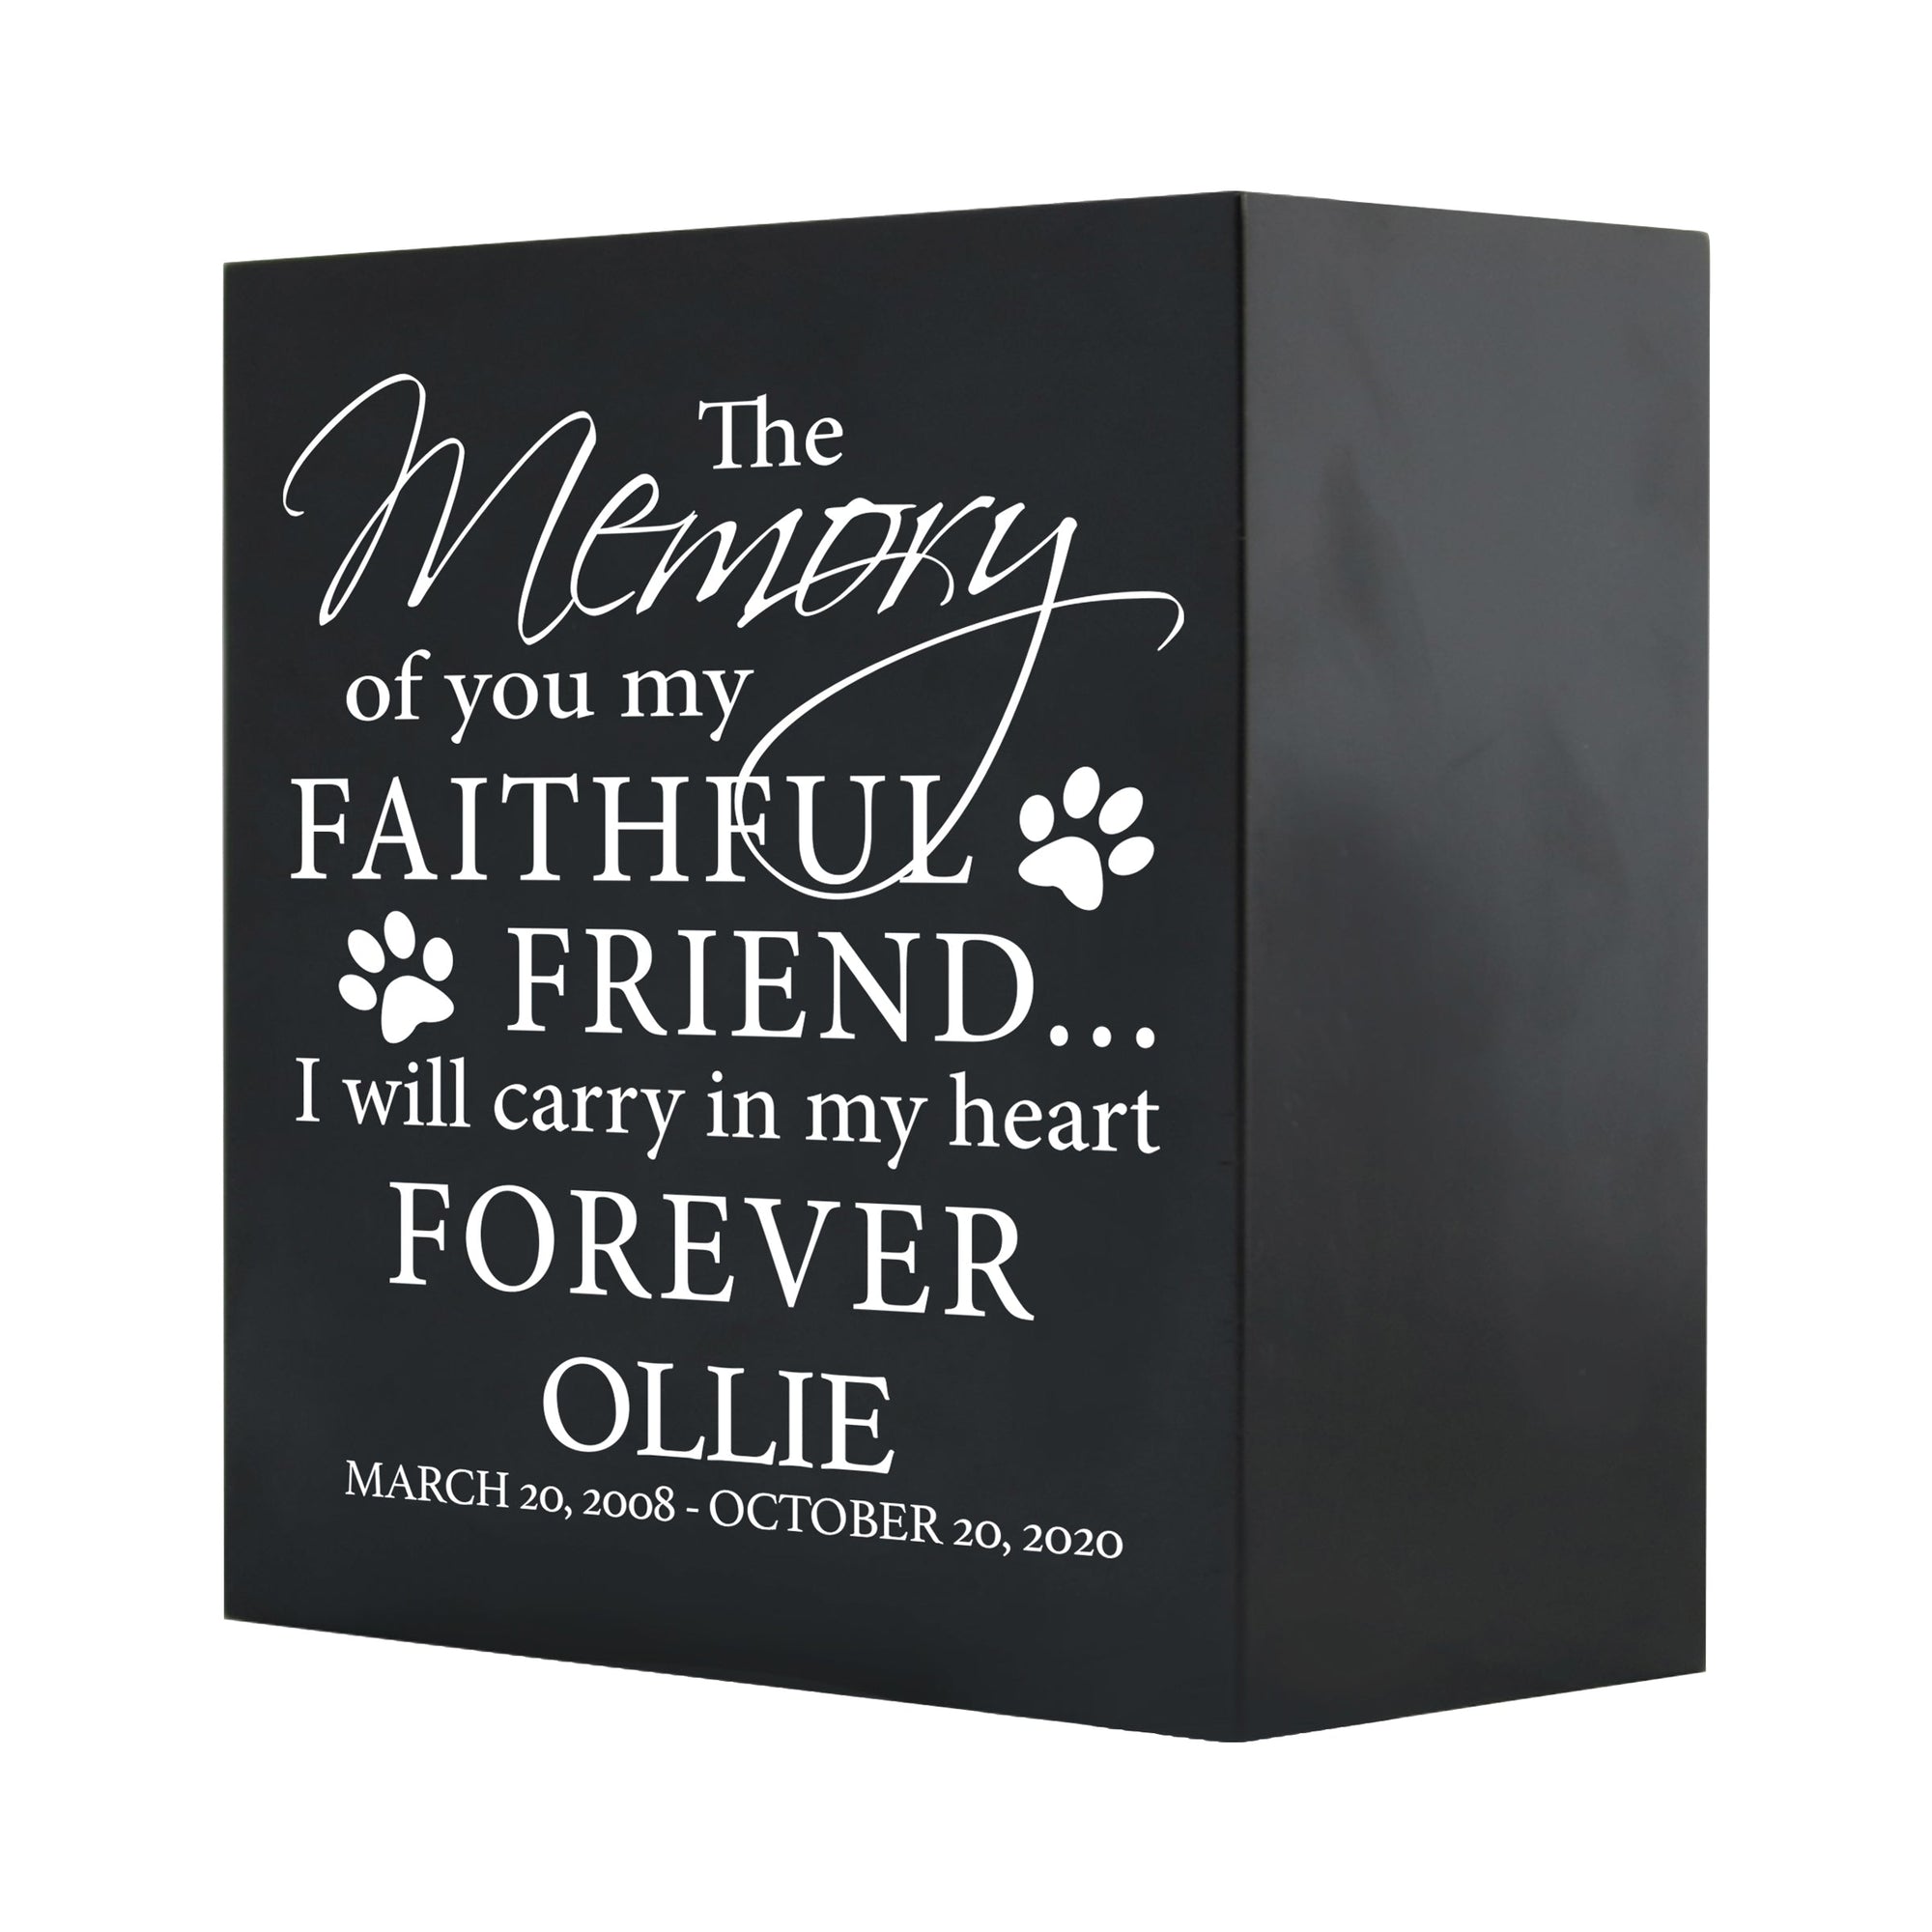 Pet Memorial Shadow Box Cremation Urn for Dog or Cat - The Memory of You